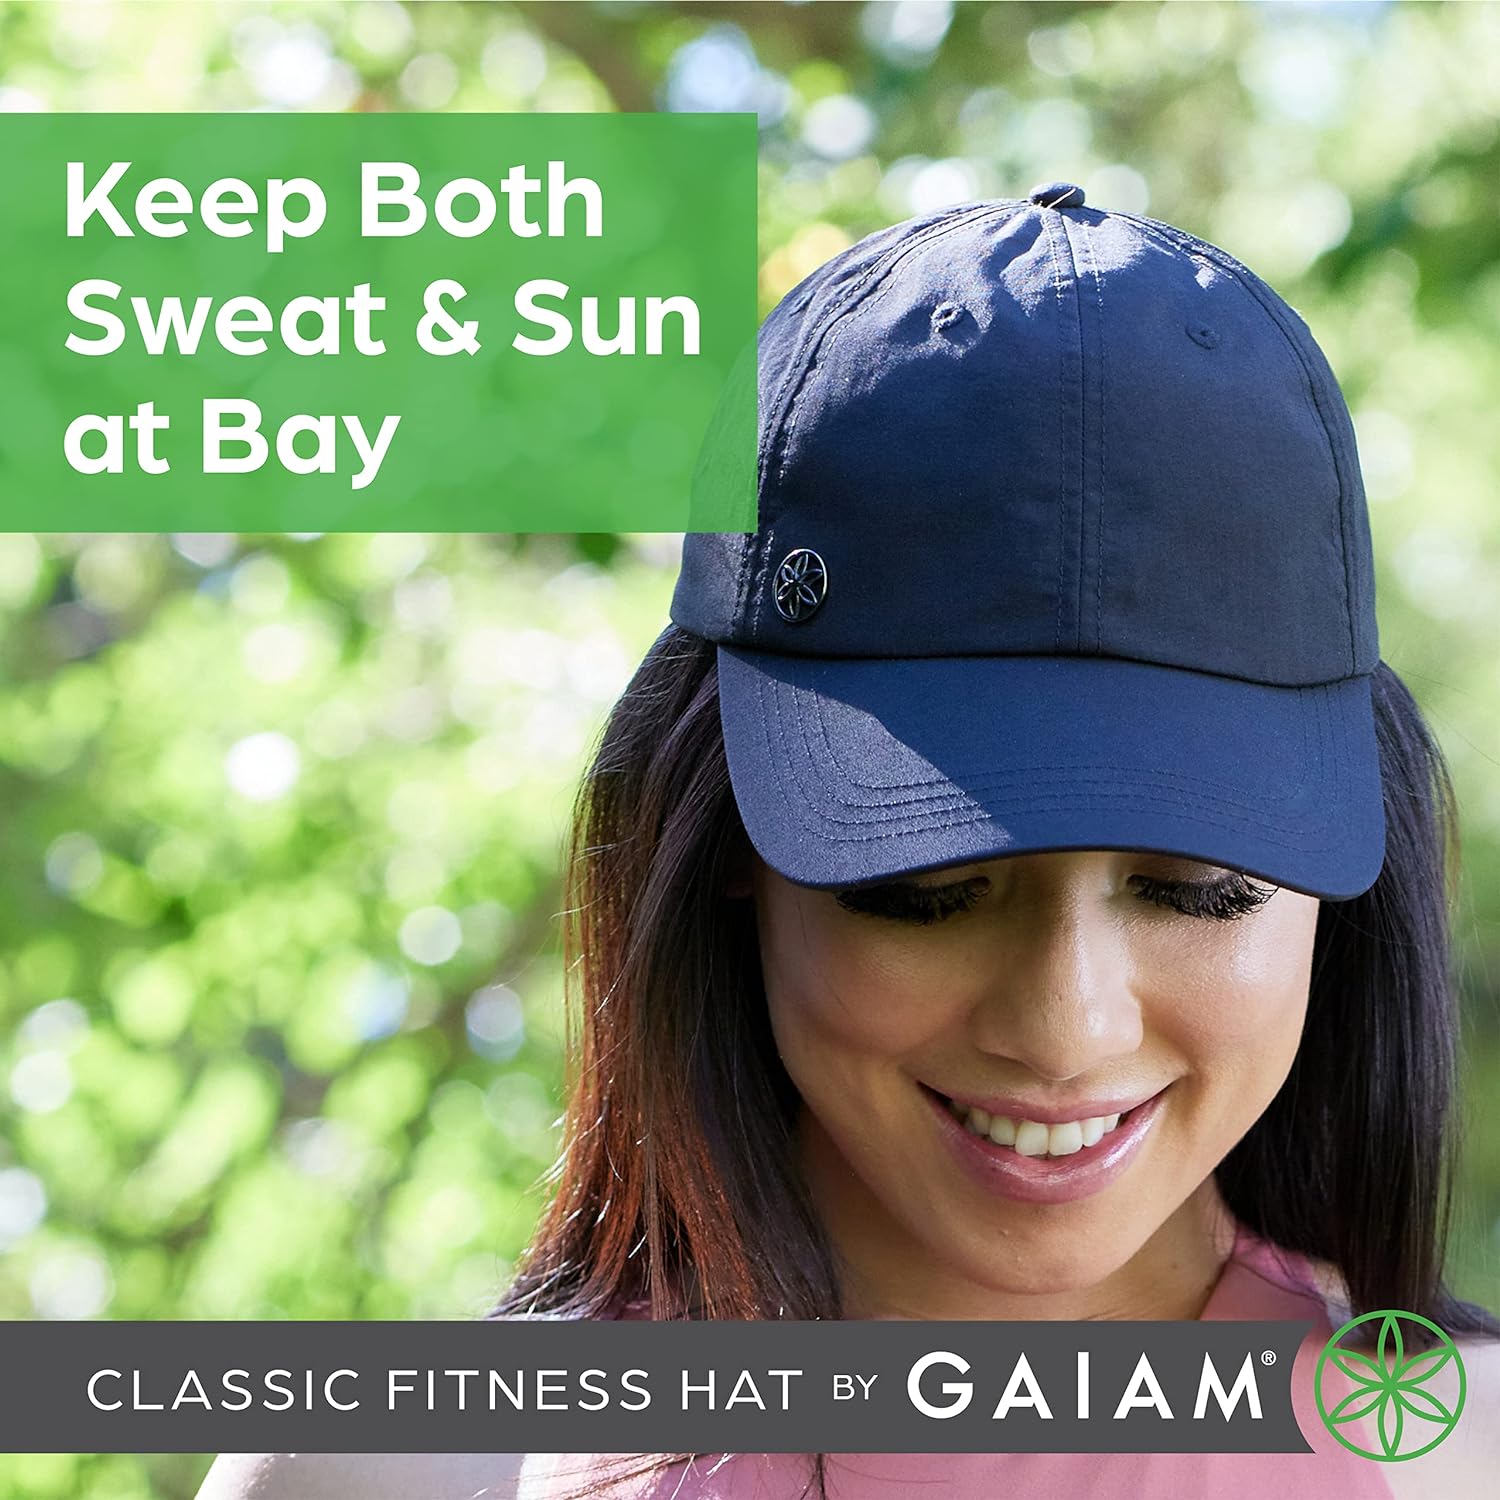 Gaiam Womens Classic Fitness Running Hat - Ponytail Hats with Quick-Dry Sweatband for Hiking  Summer Beach Vacation